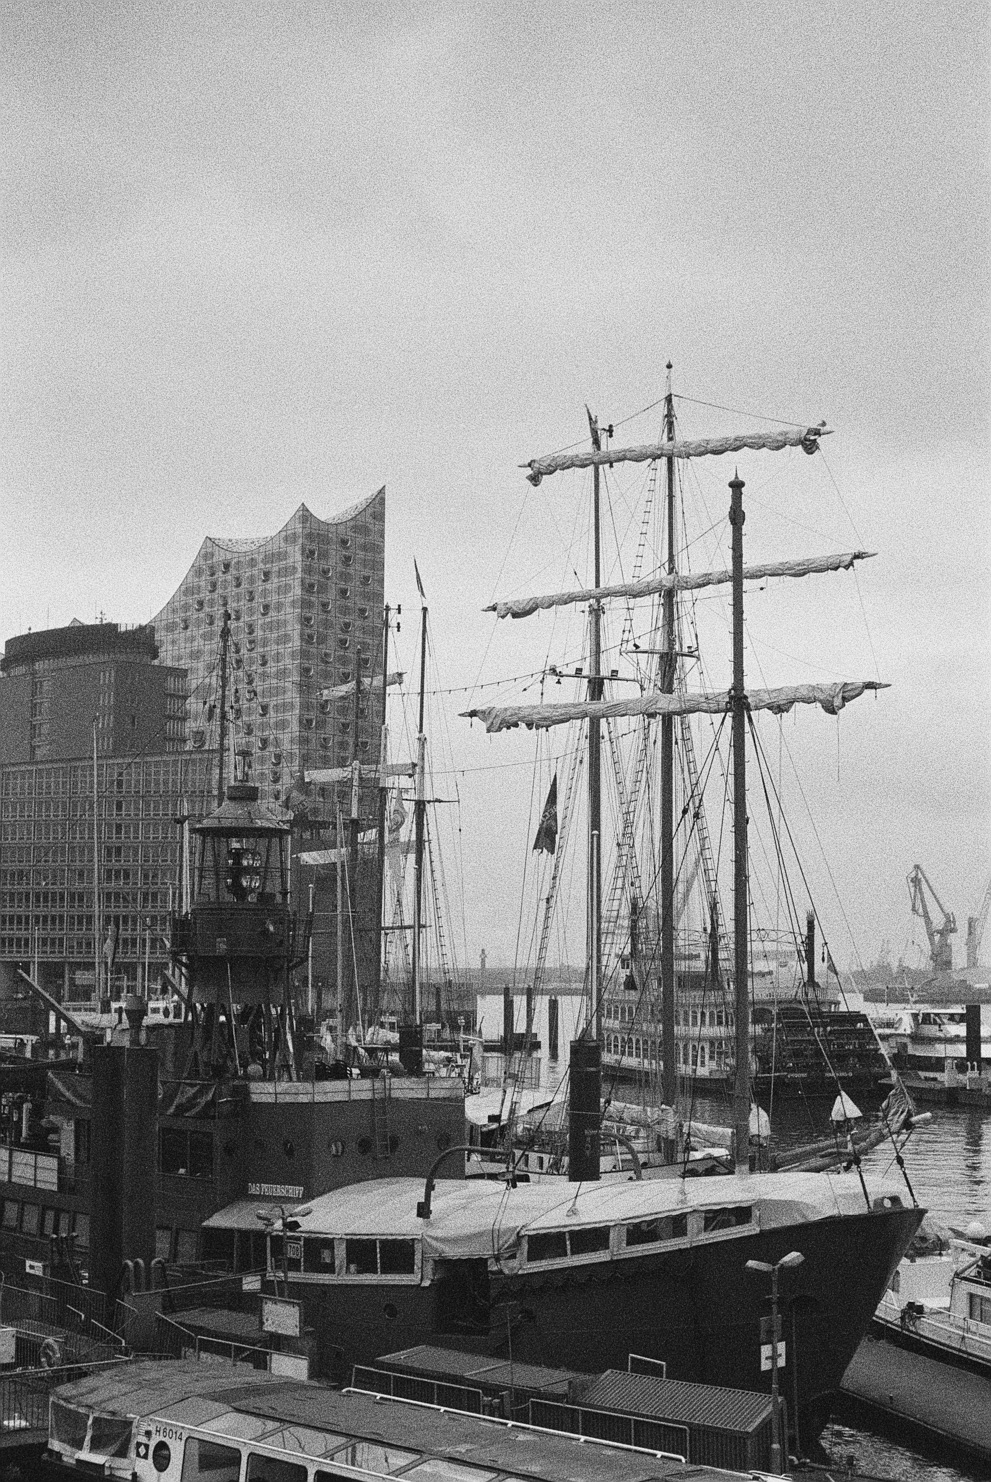 Historic sailing ships with the Elbphilharmonie in the background. Shot on Ilford Delta 3200